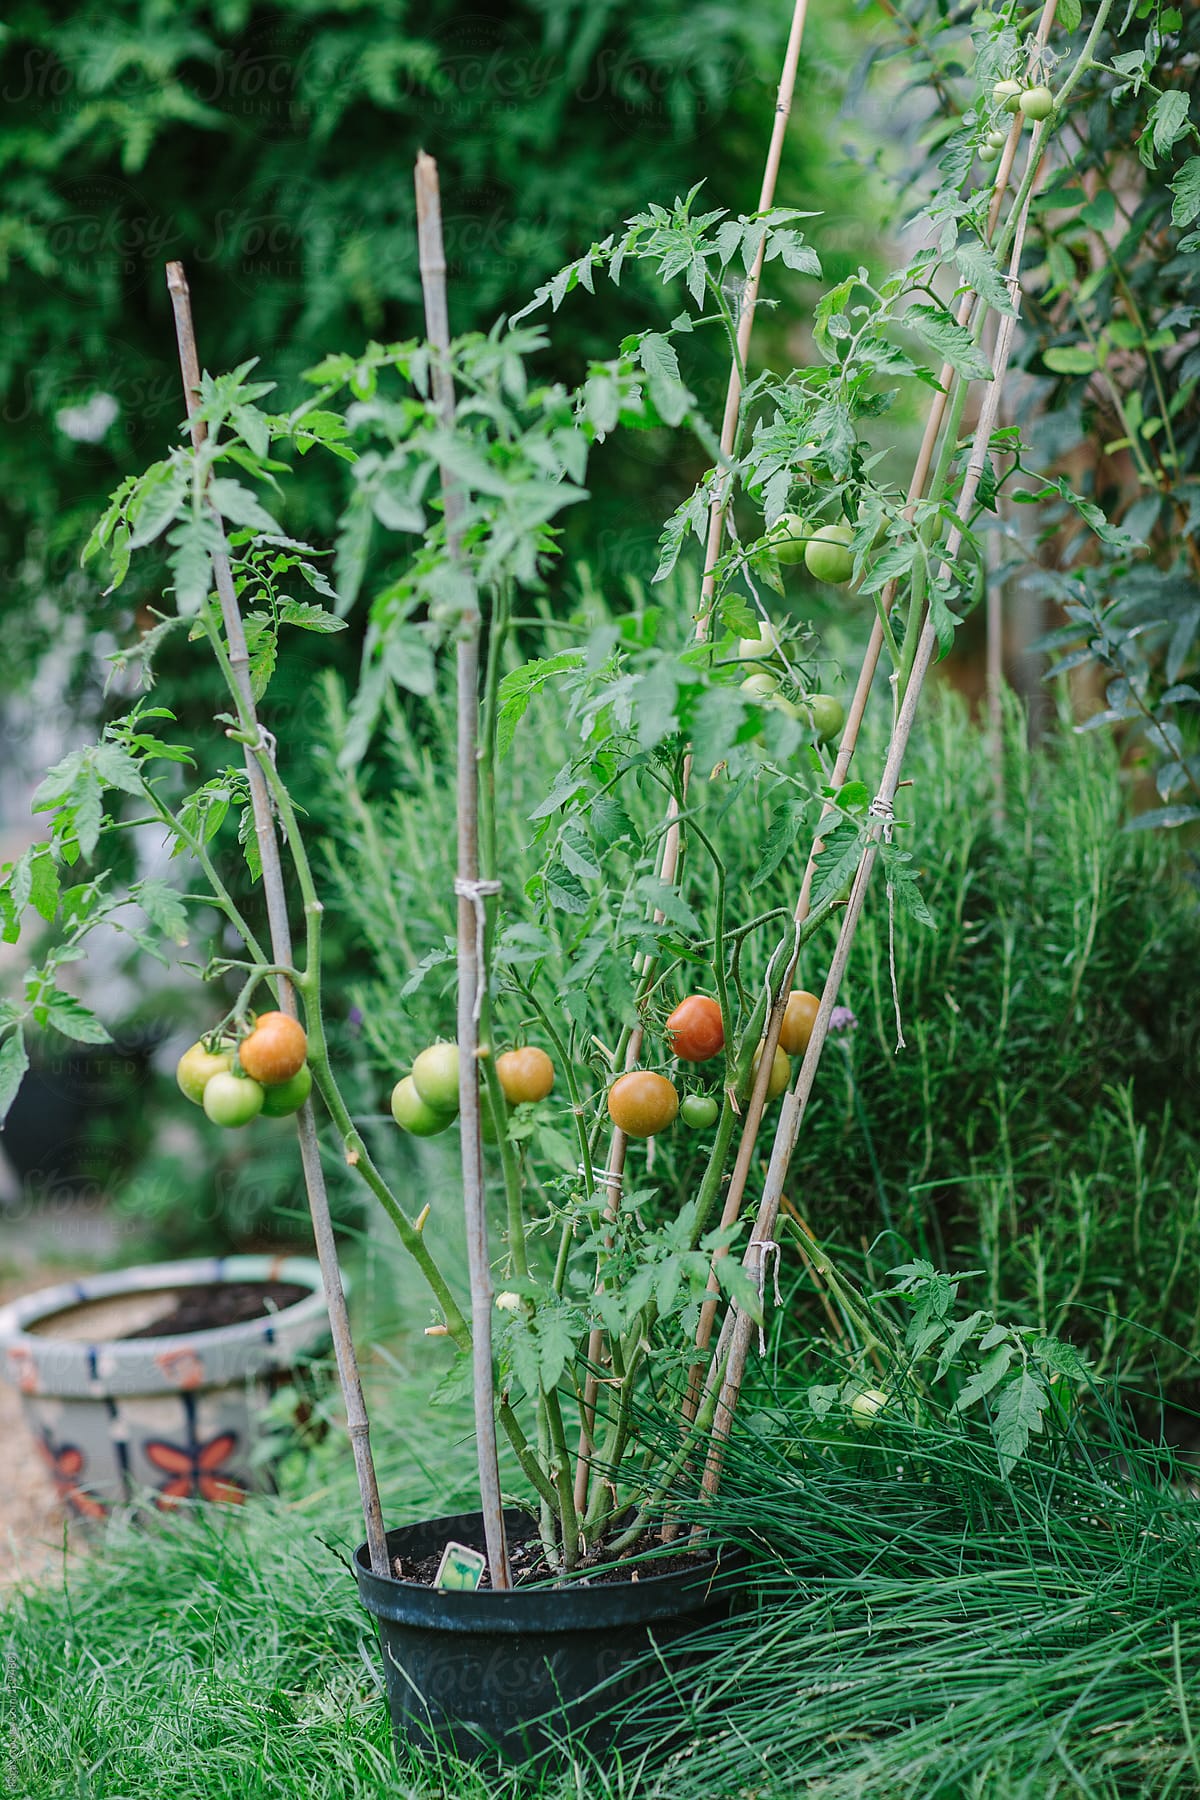 Tomato plants growing in a garden.